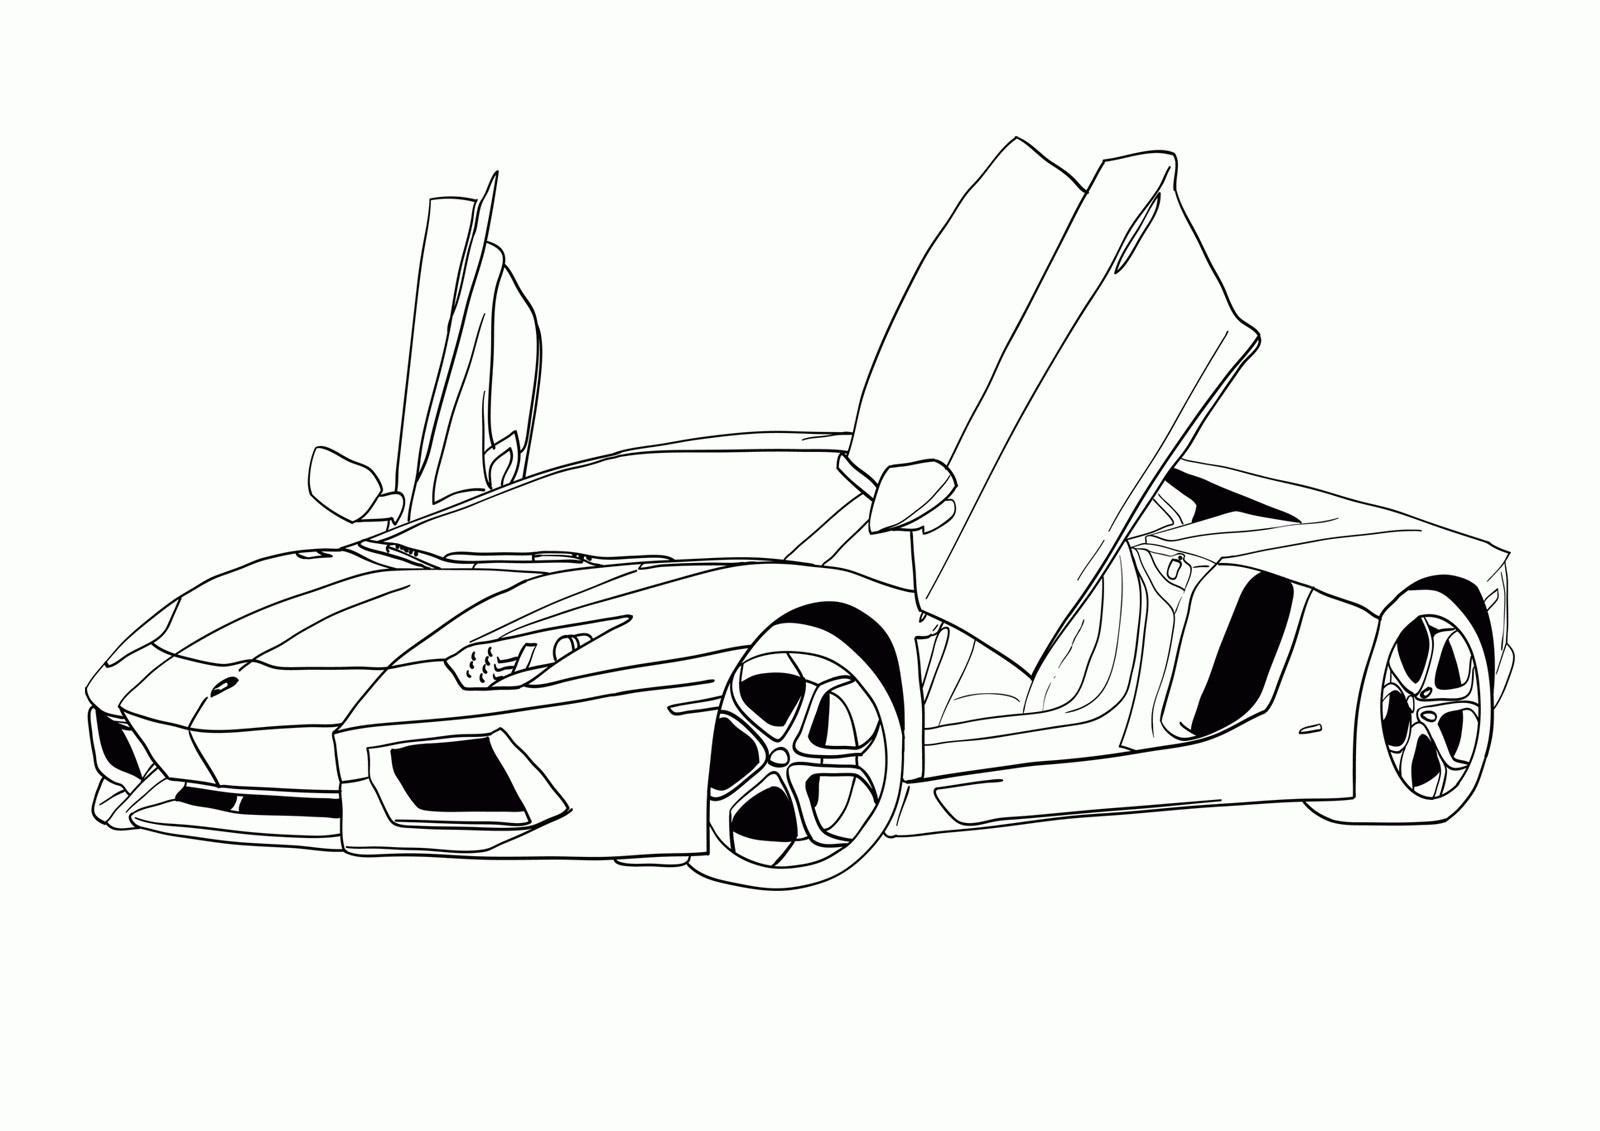 Car Printable Coloring Pages
 Coloring Pages Cars Coloring Pages Free and Printable